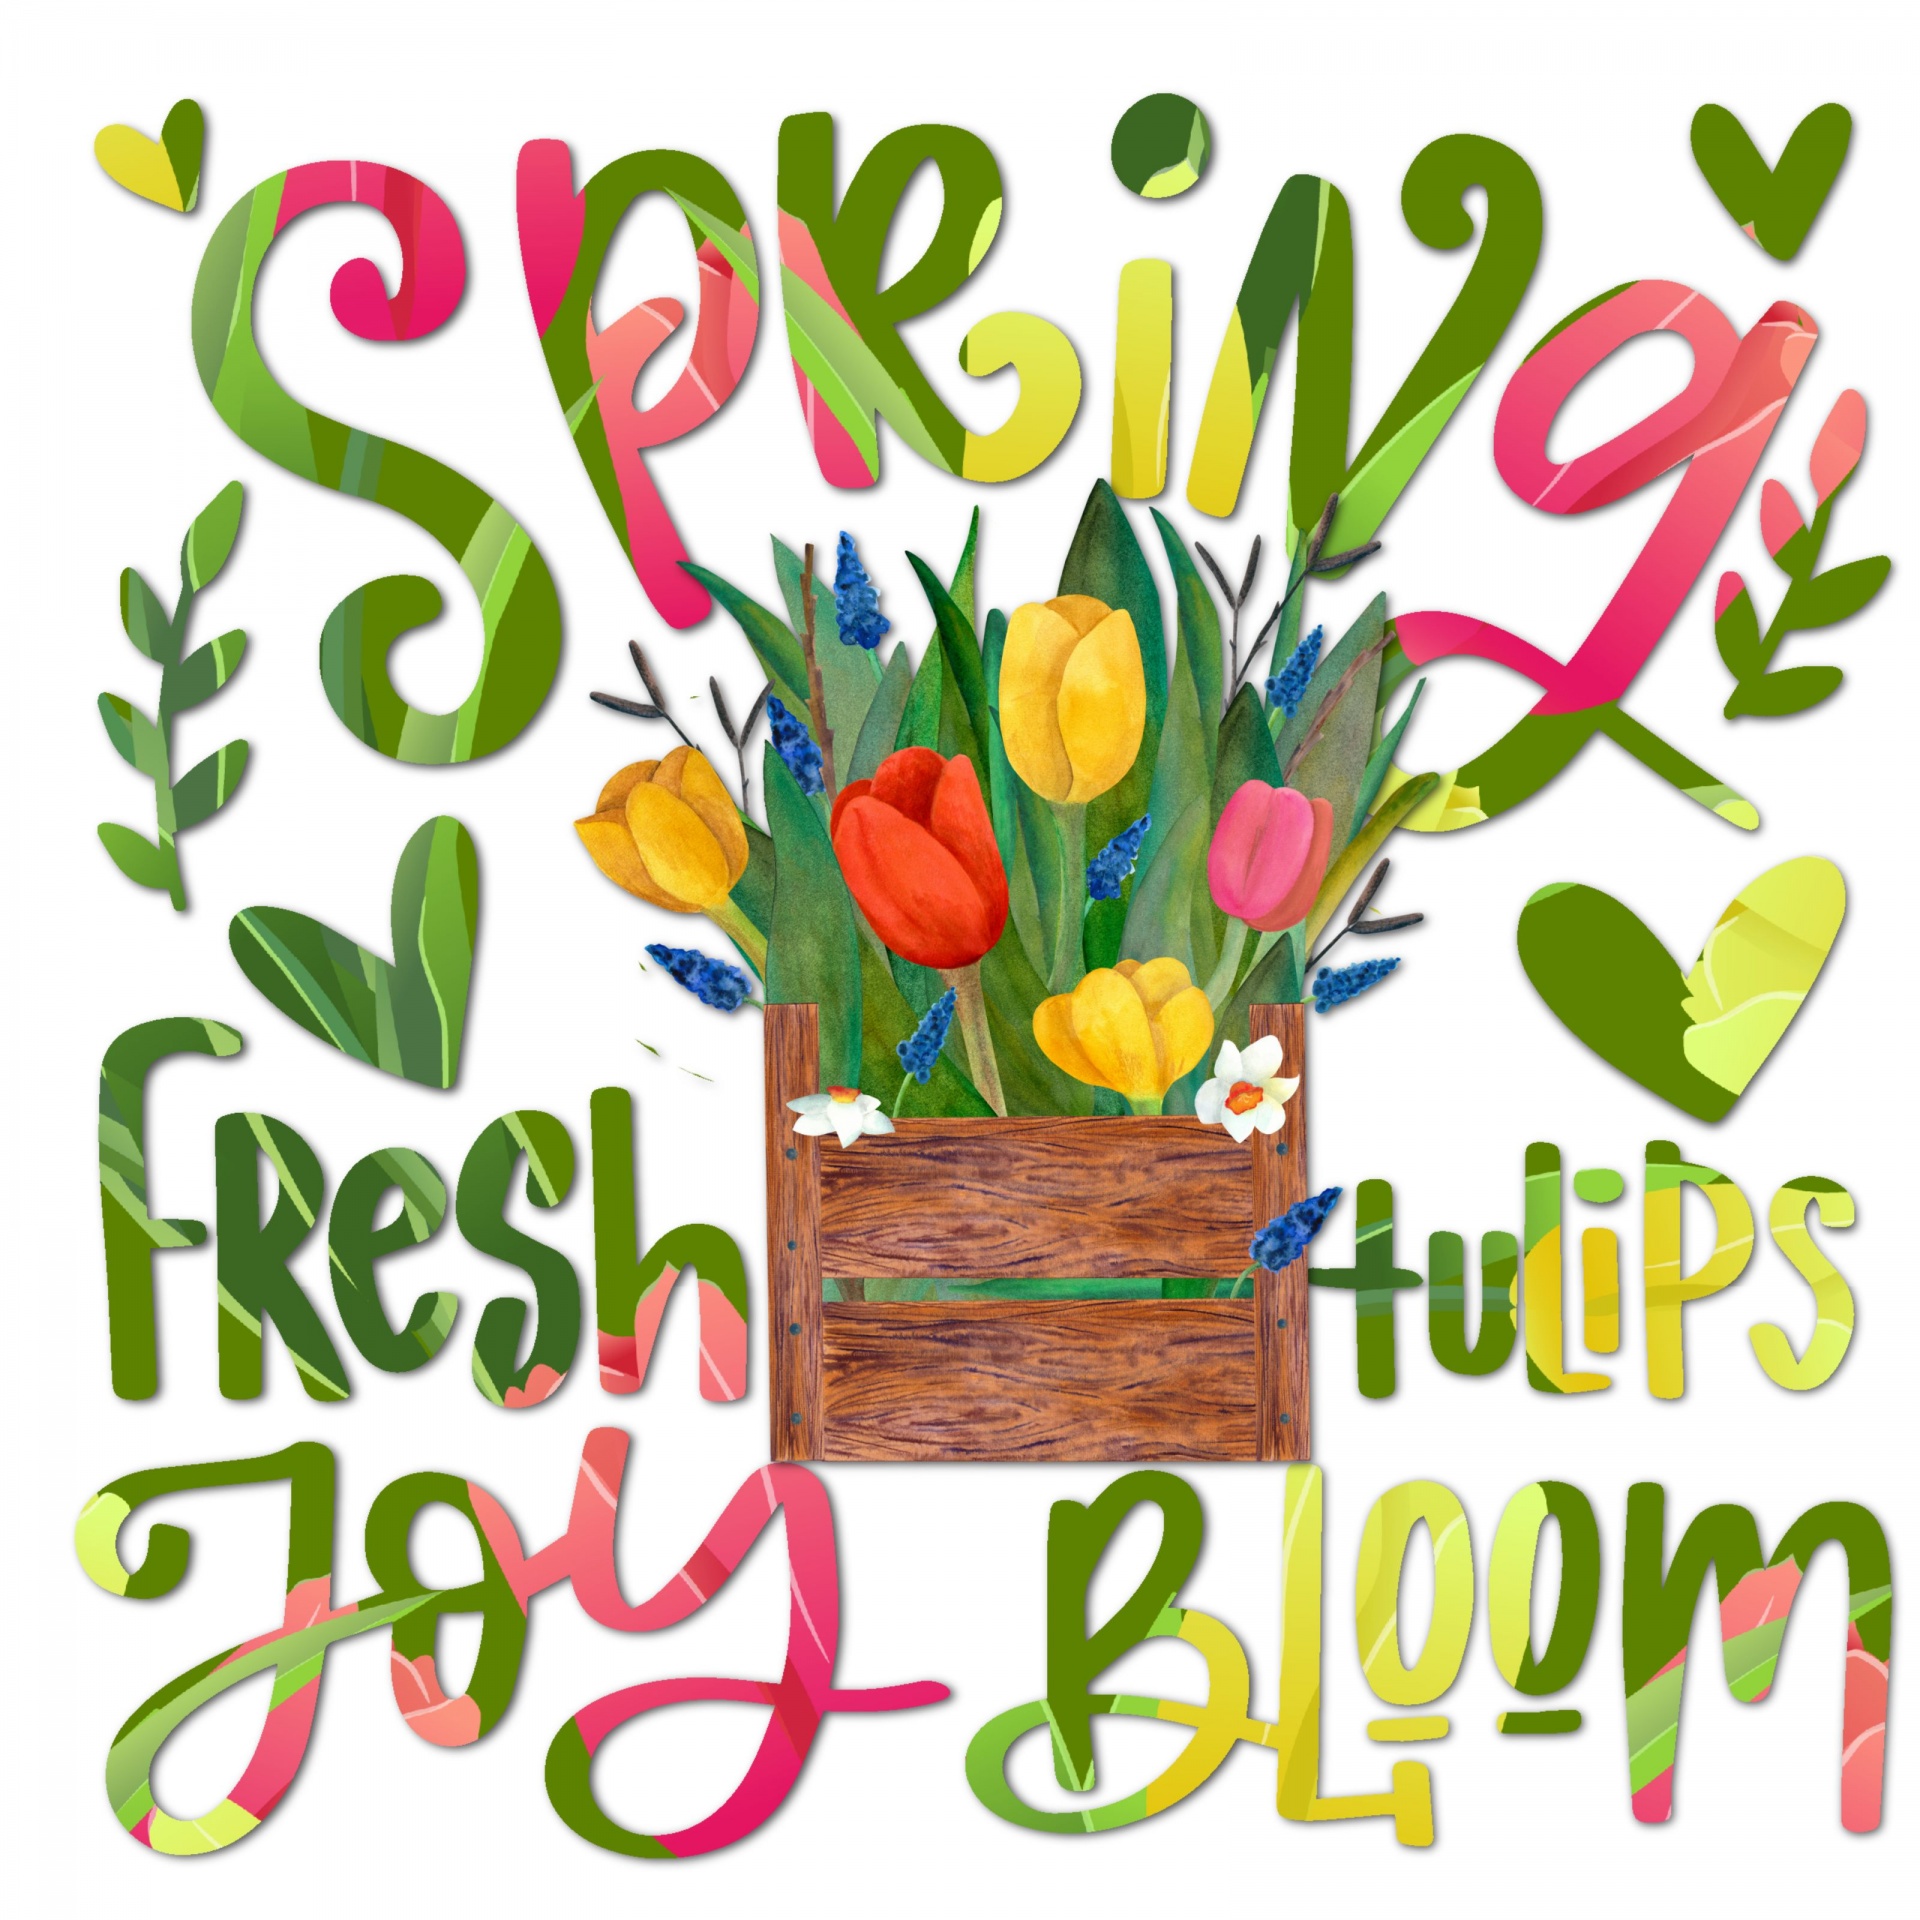 poser of watercolor tulips and tulip-filled word art about Spring